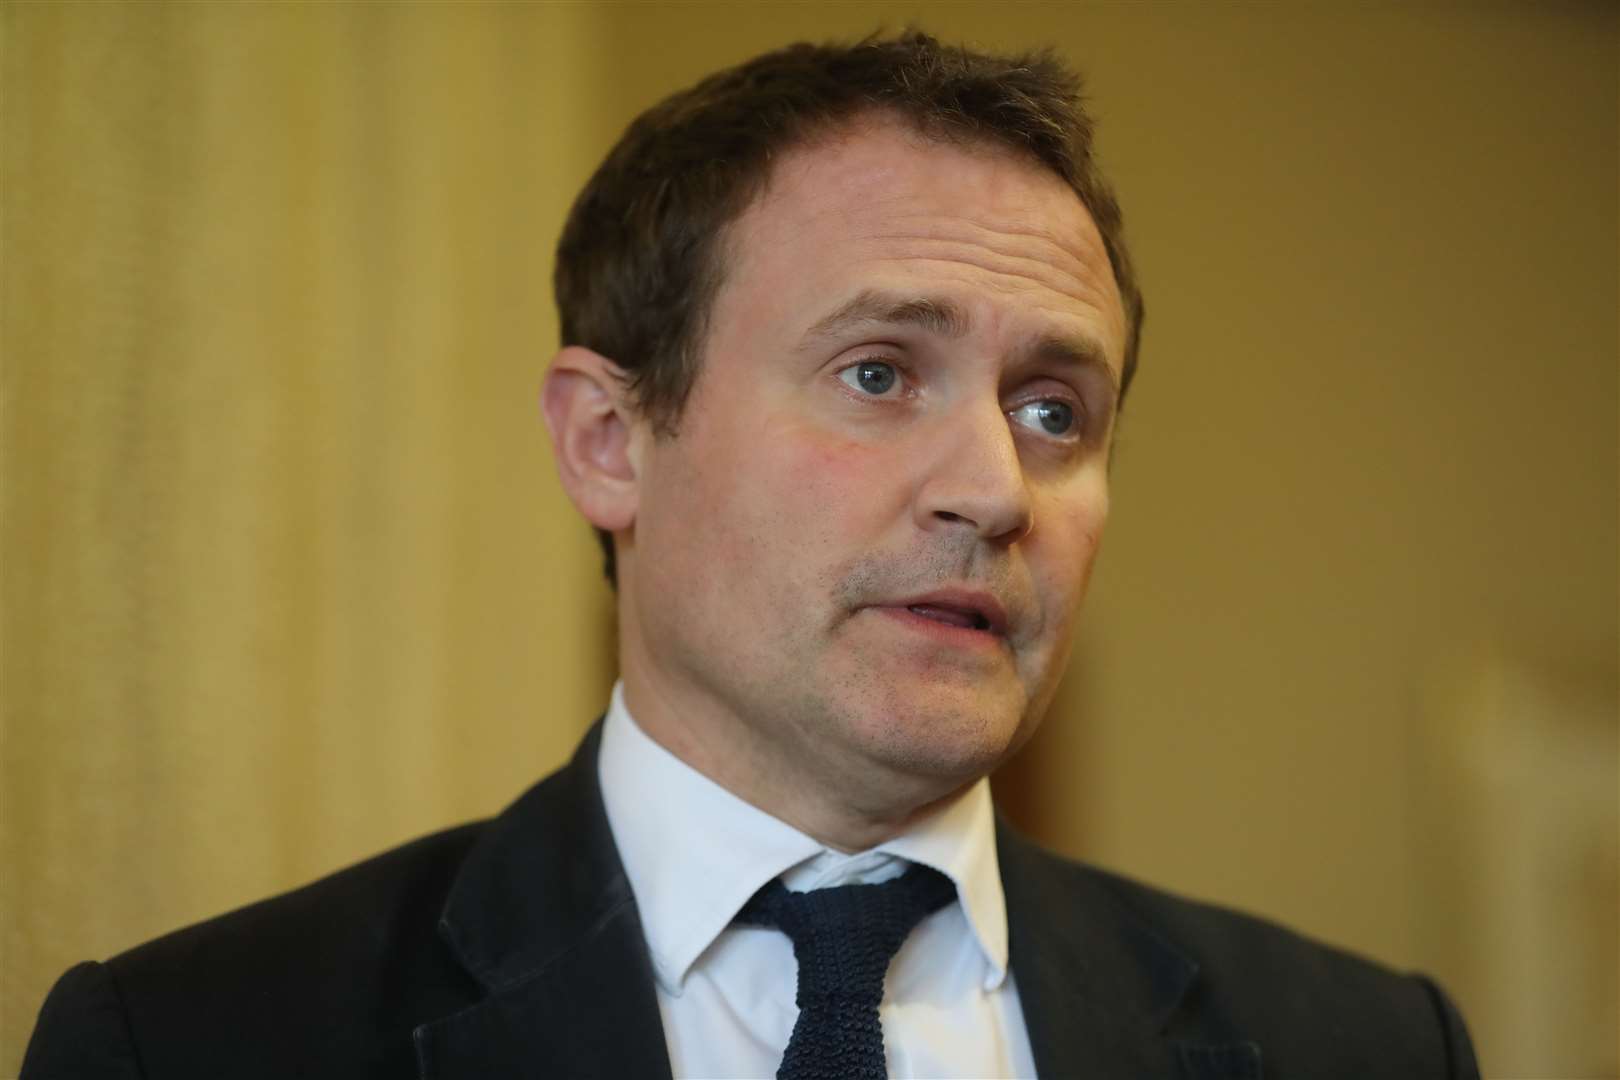 Ex-soldier Tom Tugendhat announced in January that he would stand for leader should Boris Johnson quit (Niall Carson/PA)